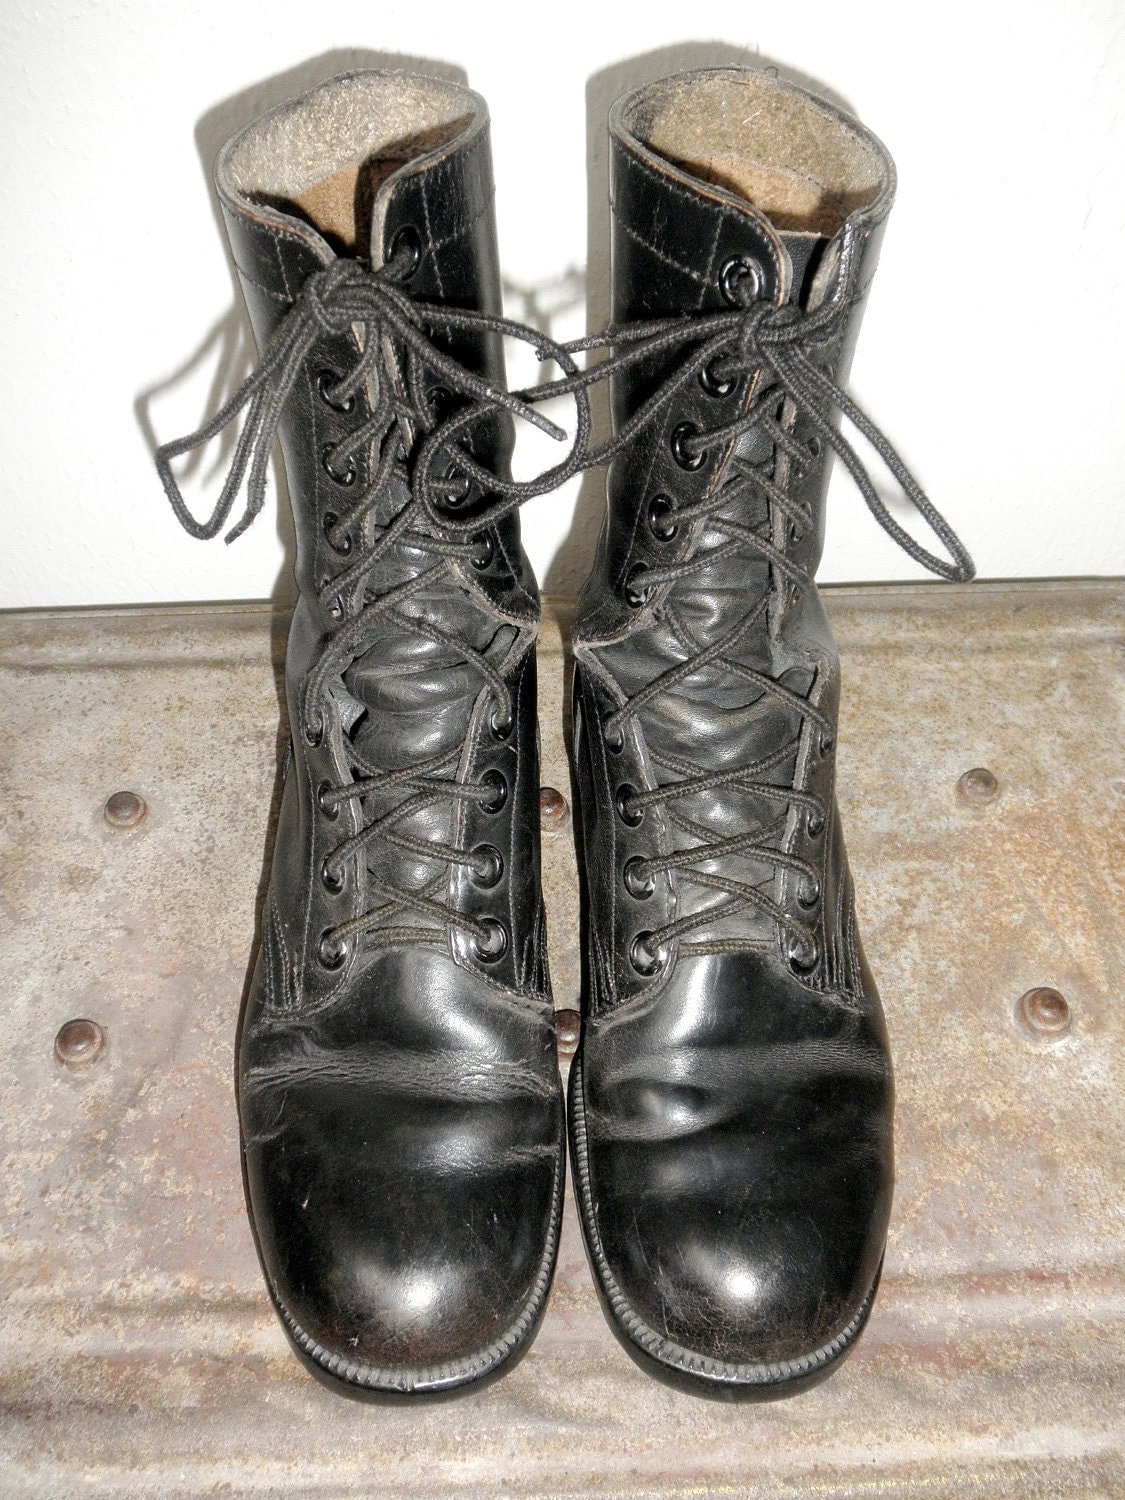 Authentic Military Combat Boots with Shiny Black Leather